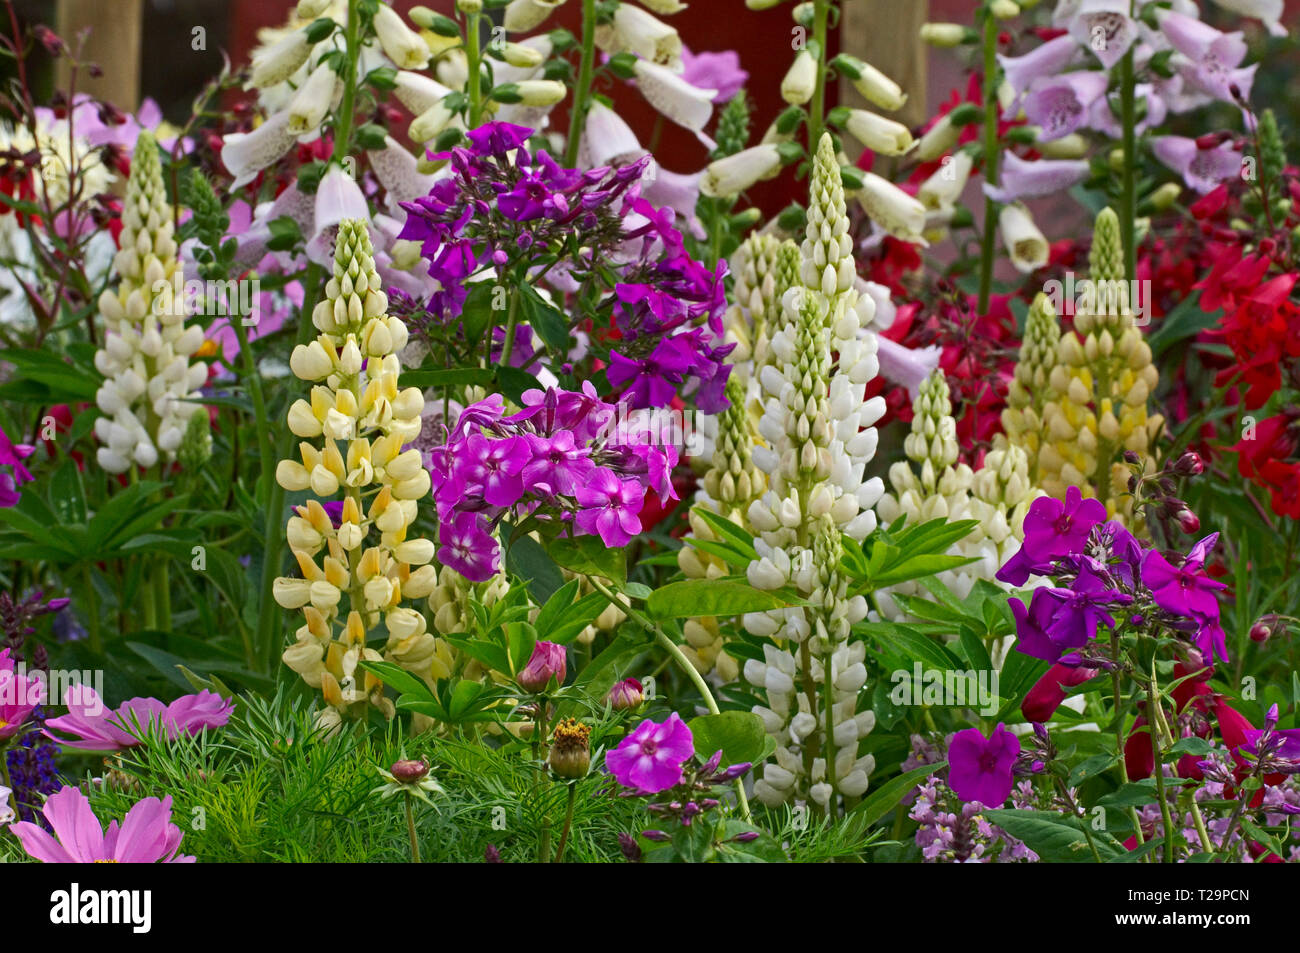 Colourful and attractive flower border in close up with mixed planting including lupins, cosmos, phlox and foxgloves Stock Photo